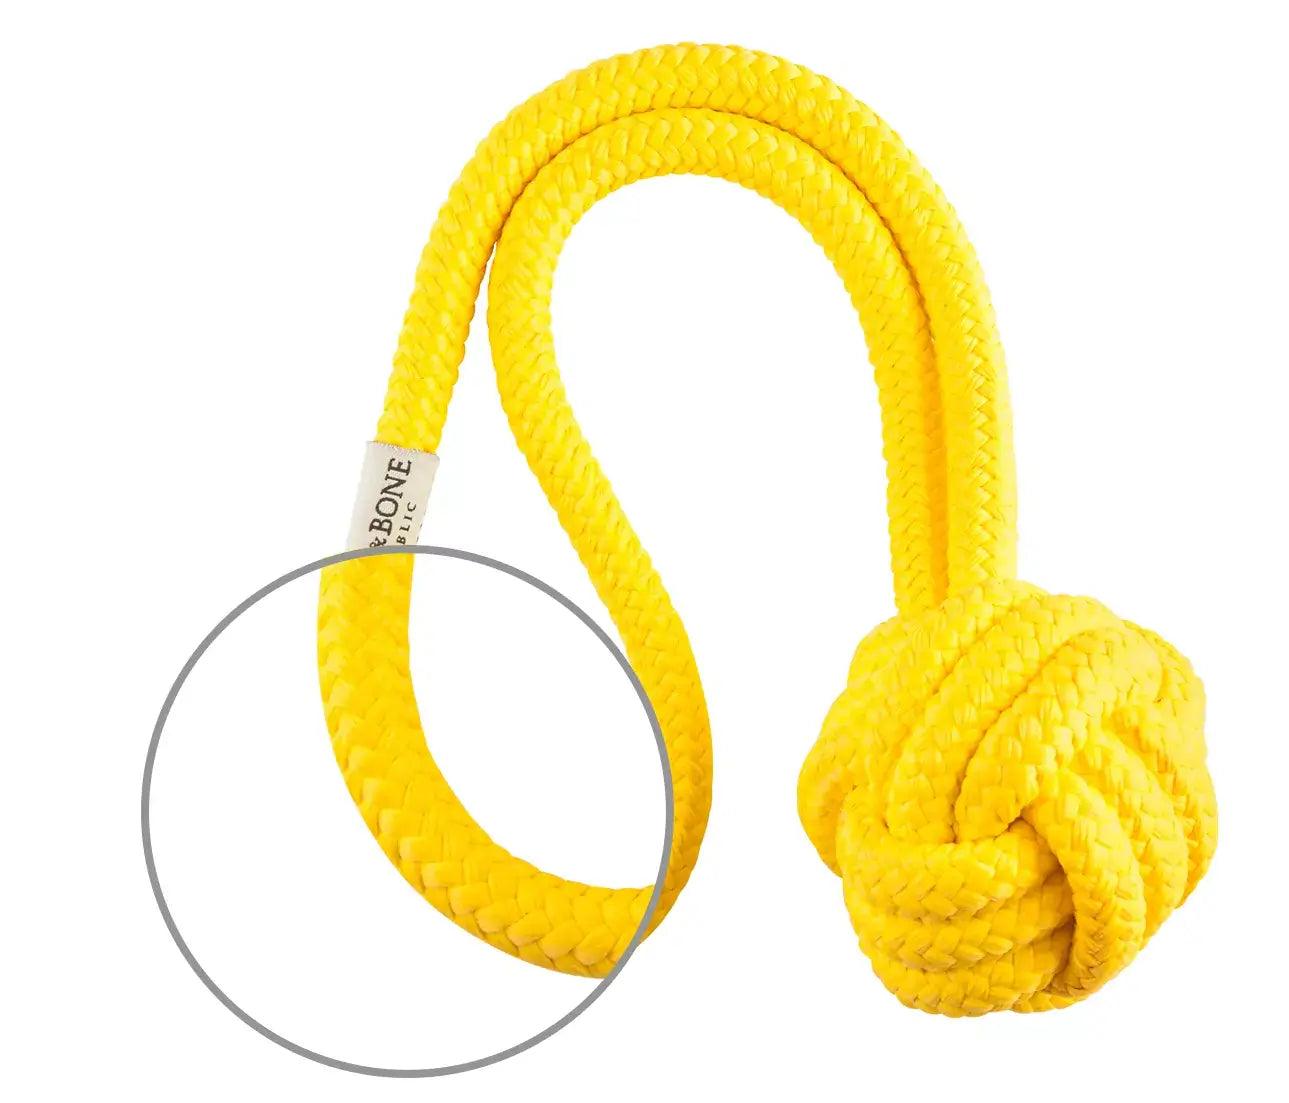 A yellow rope with a circle in the middle, dog toy from Bowl&Bone Republic.